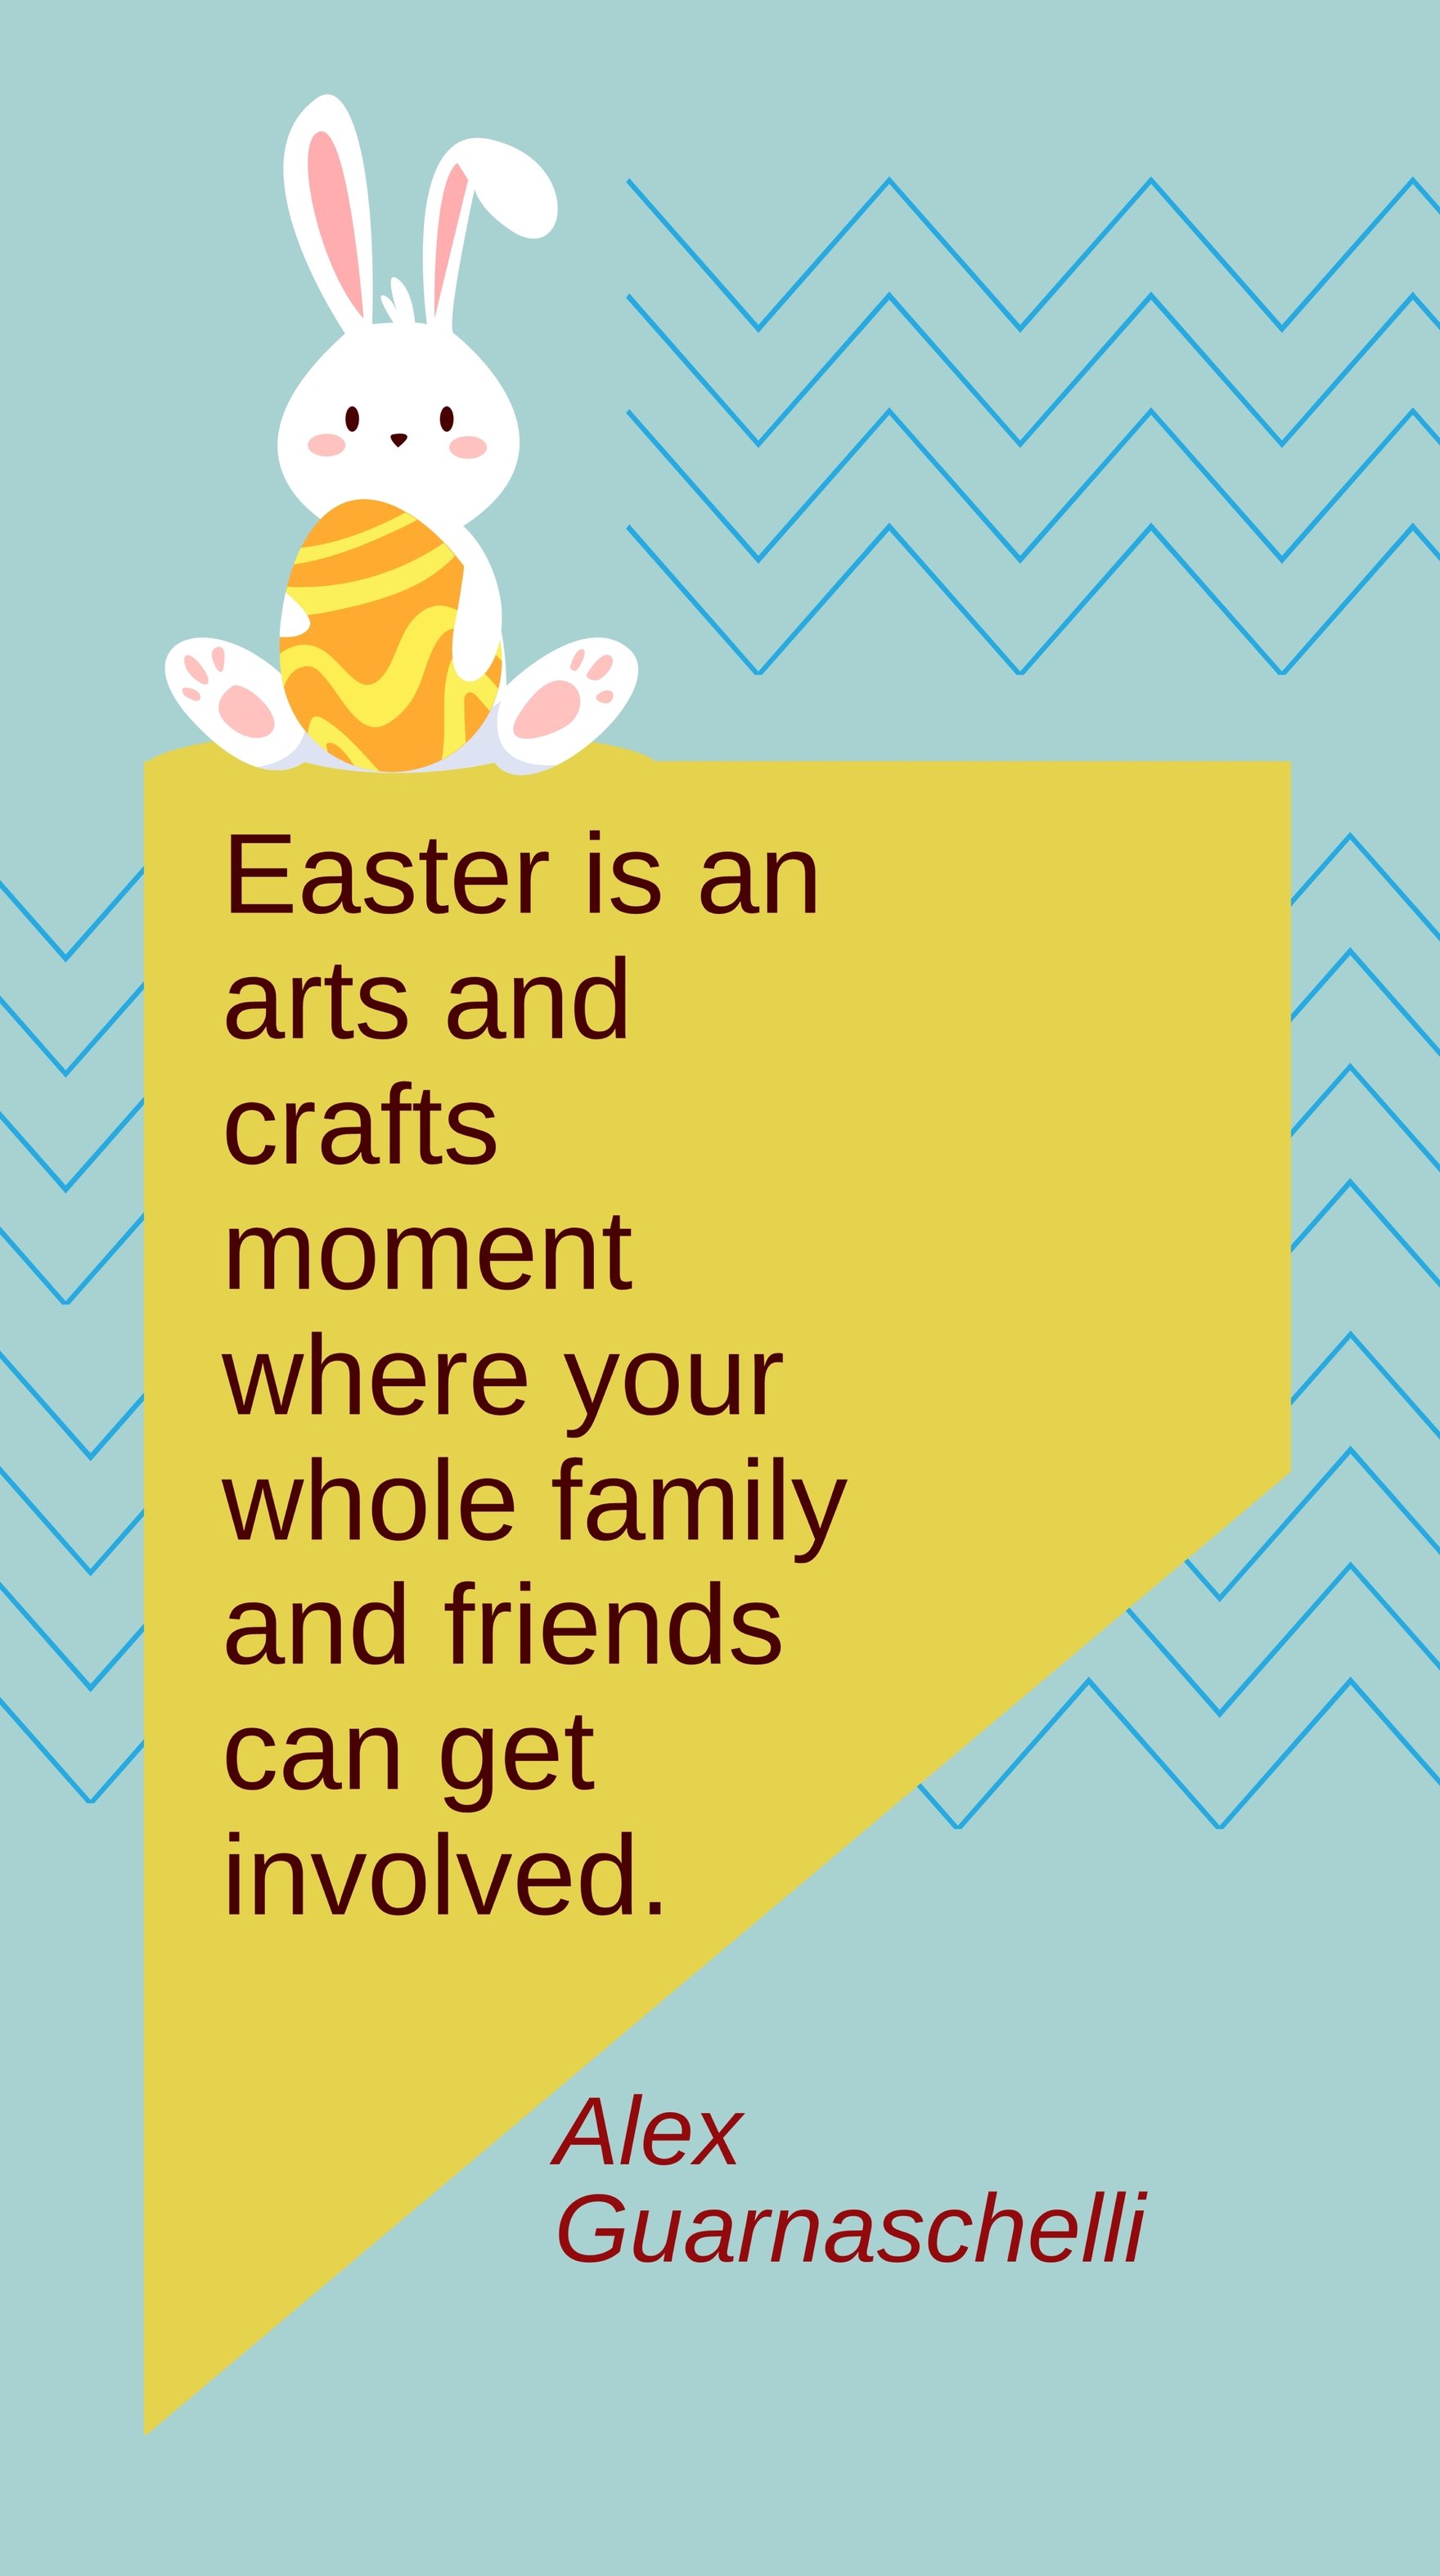 Alex Guarnaschelli - Easter is an arts and crafts moment where your whole family and friends can get involved.